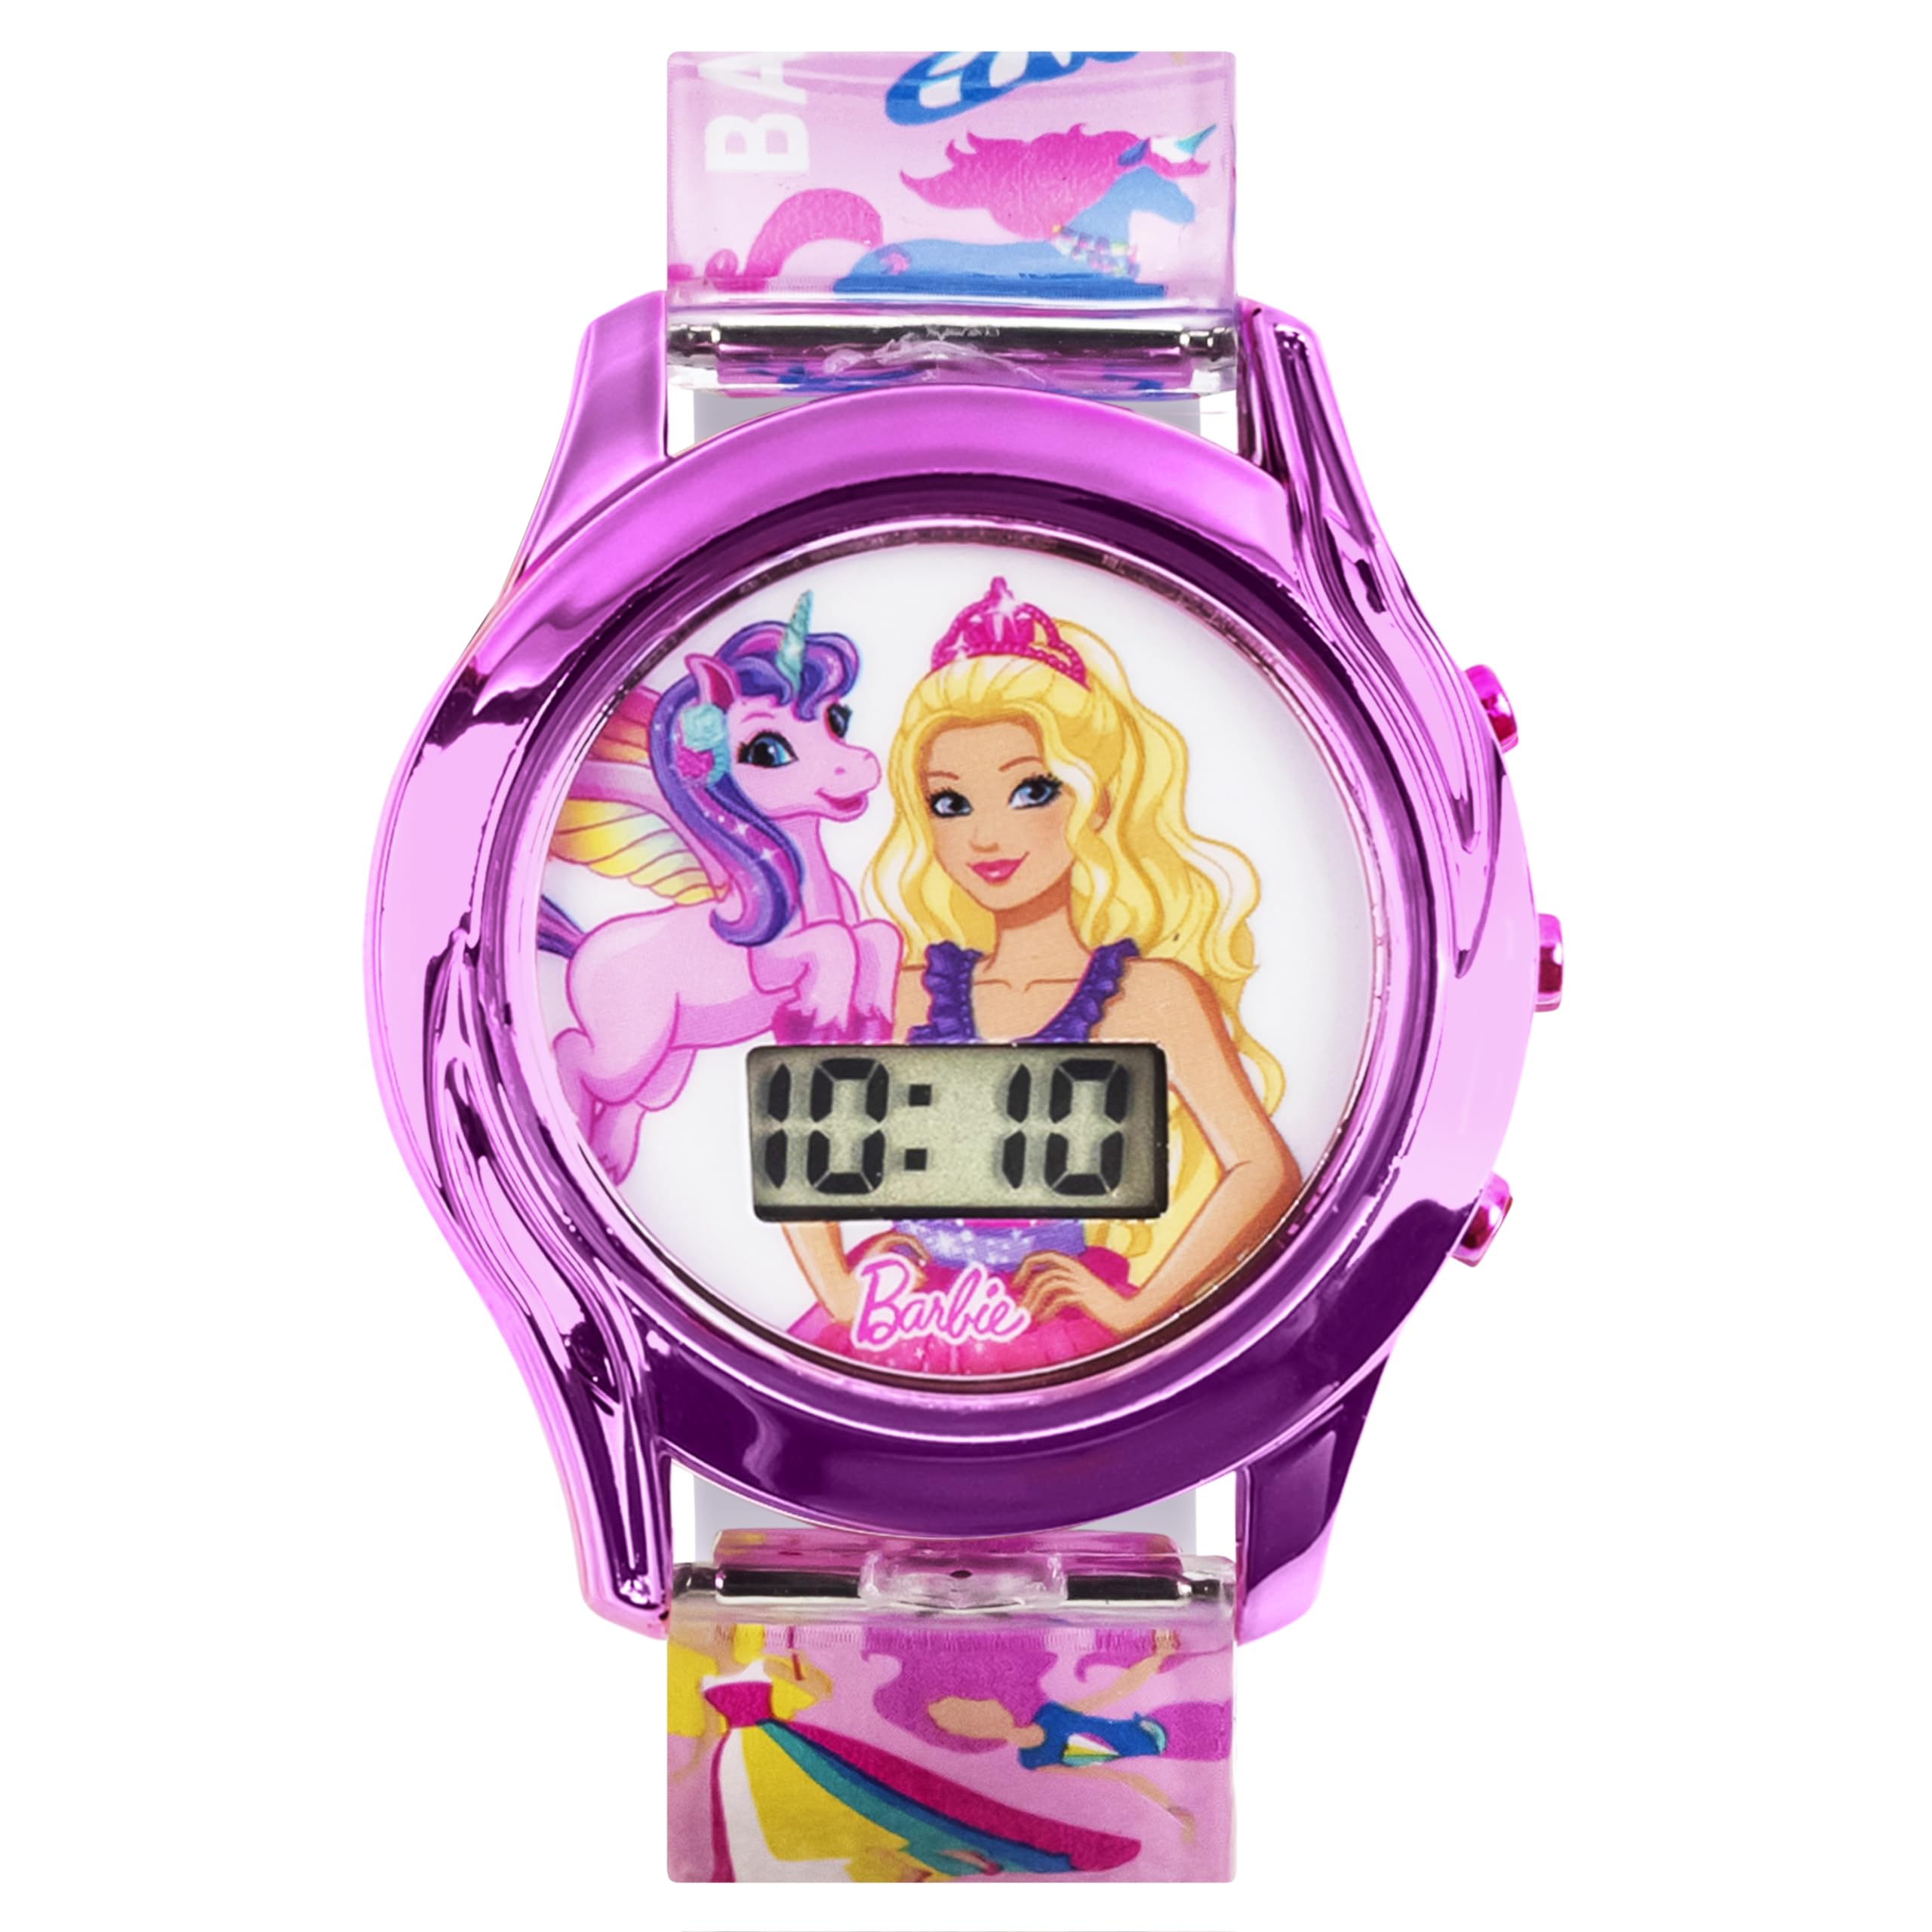 Accutime Barbie The Movie Digital LCD Quartz Kids Pink Watch for Girls with Pink Unicorn and Fairytale Barbie Band Strap (Model: BDT4124AZ)